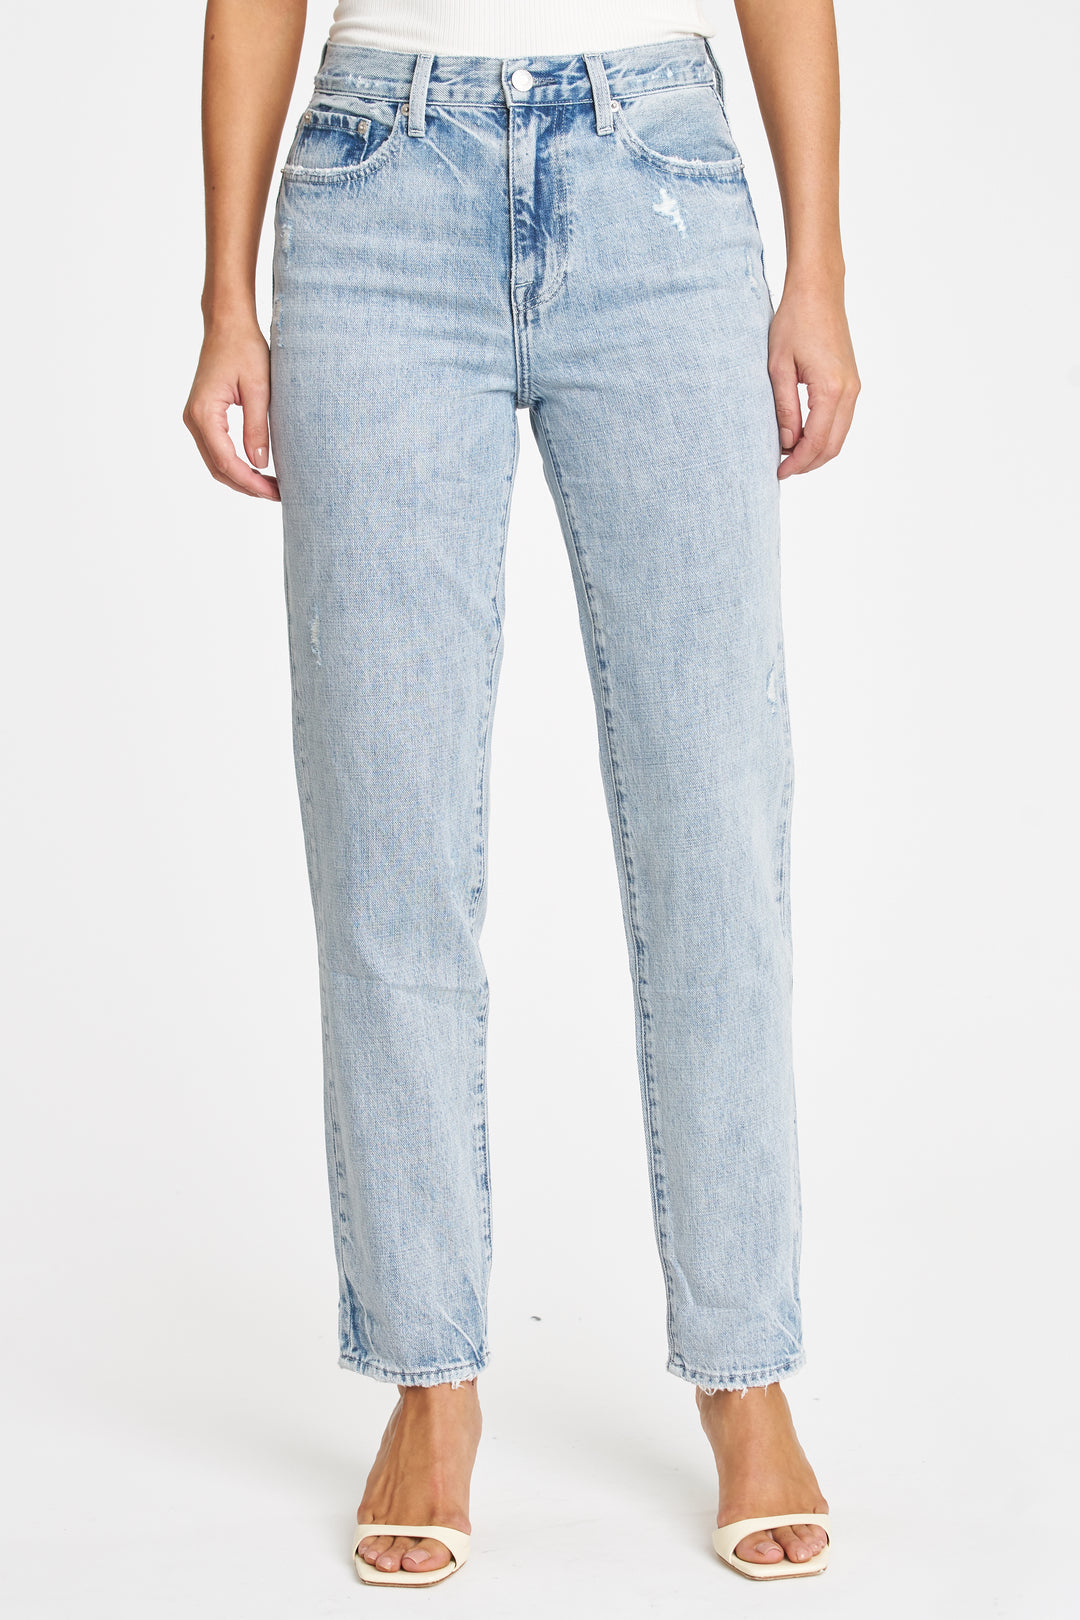 Presley High Rise Relaxed Jean in Gifted